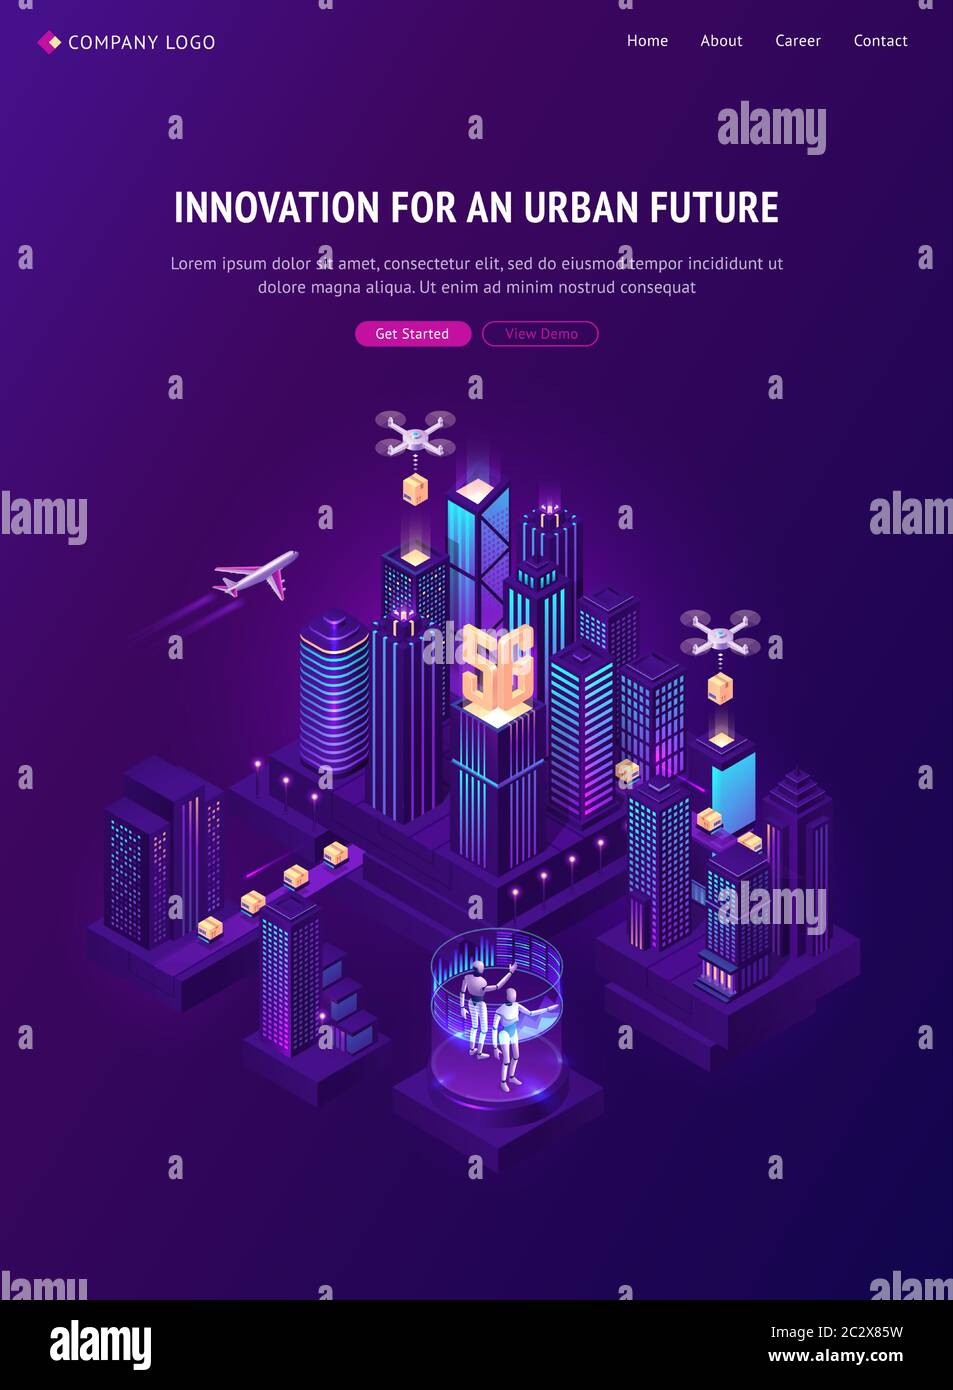 Innovation for urban future isometric landing page. Autonomous shipping technology. Vector isometric illustration of smart city with drone delivery ca Stock Vector